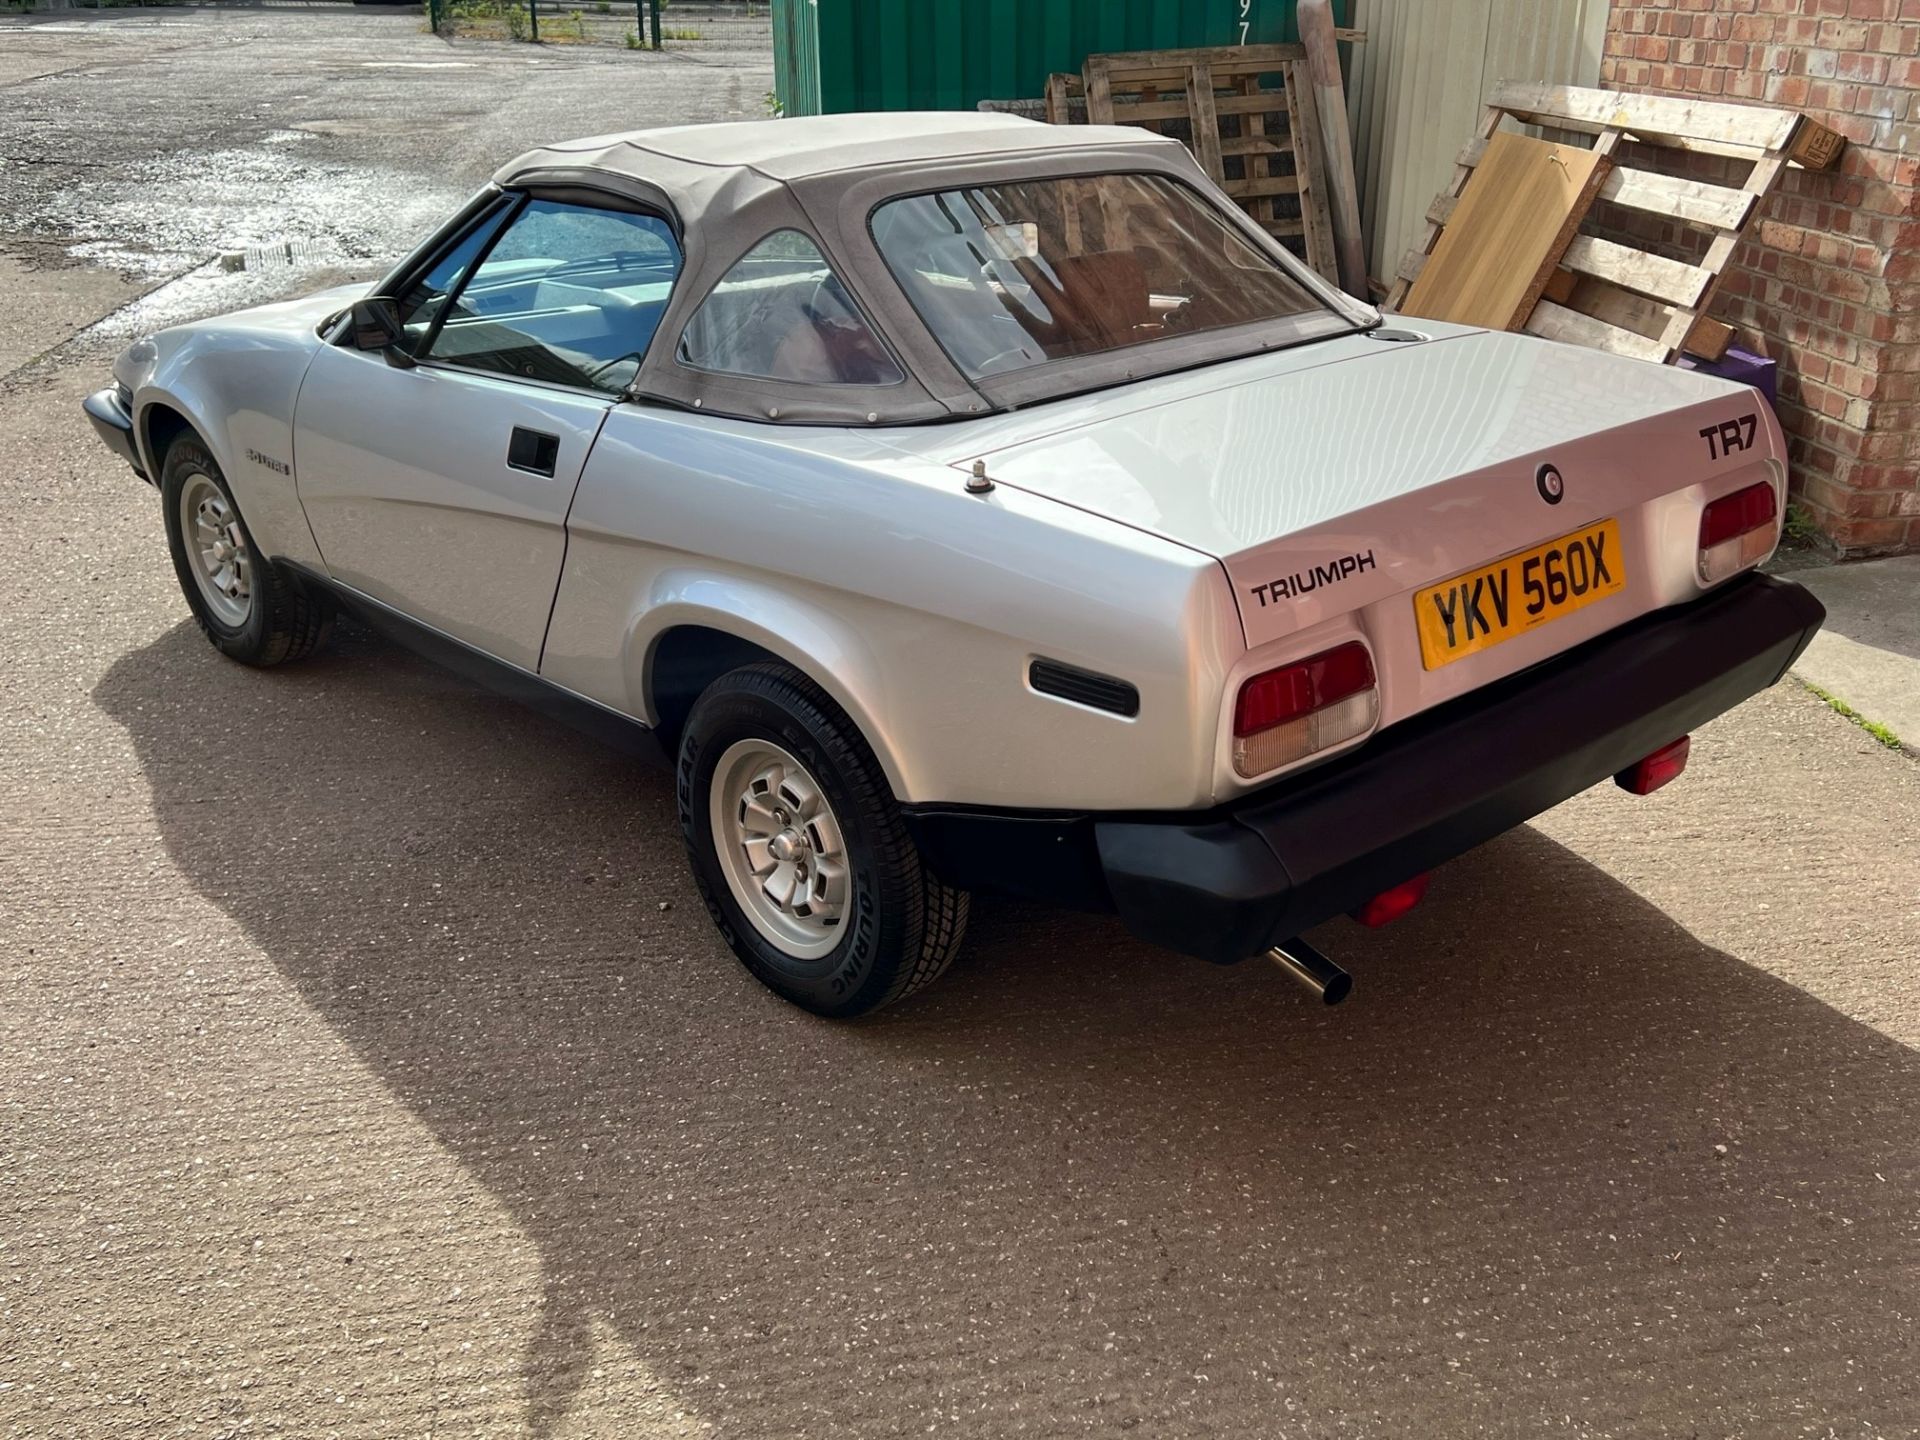 1982 Triumph TR7 Convertible Registration number YKV 560X Chassis number SATTPADJ7AA407800 - Image 5 of 16